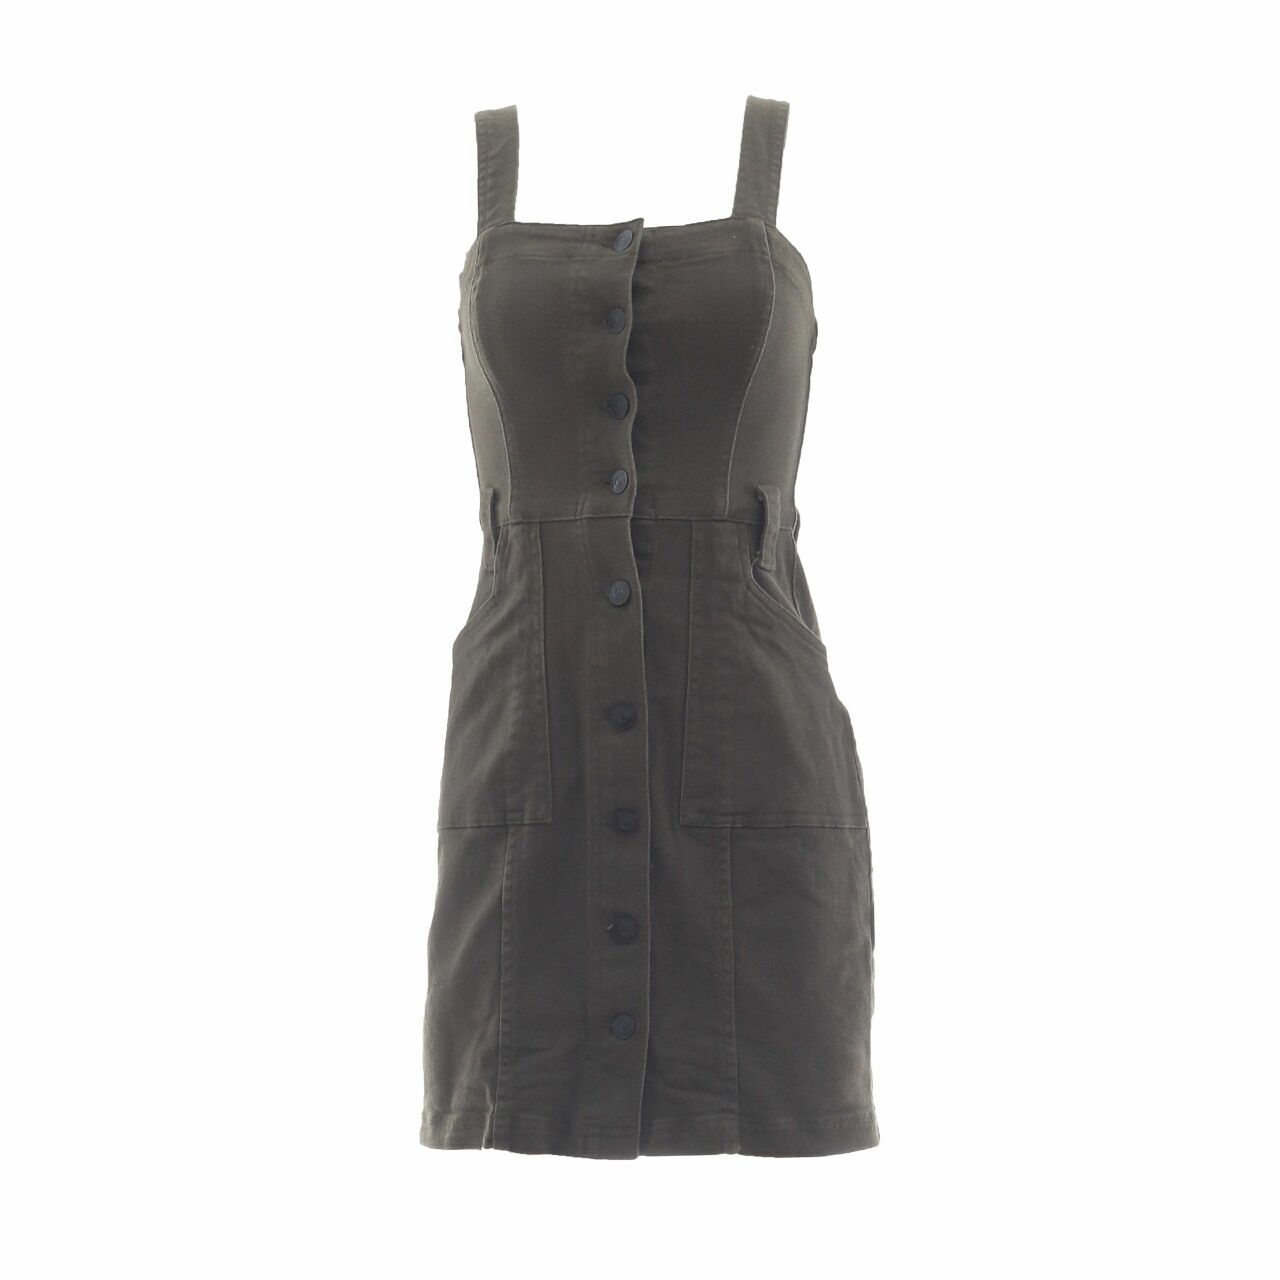 H&M Army Overall Mini Dress